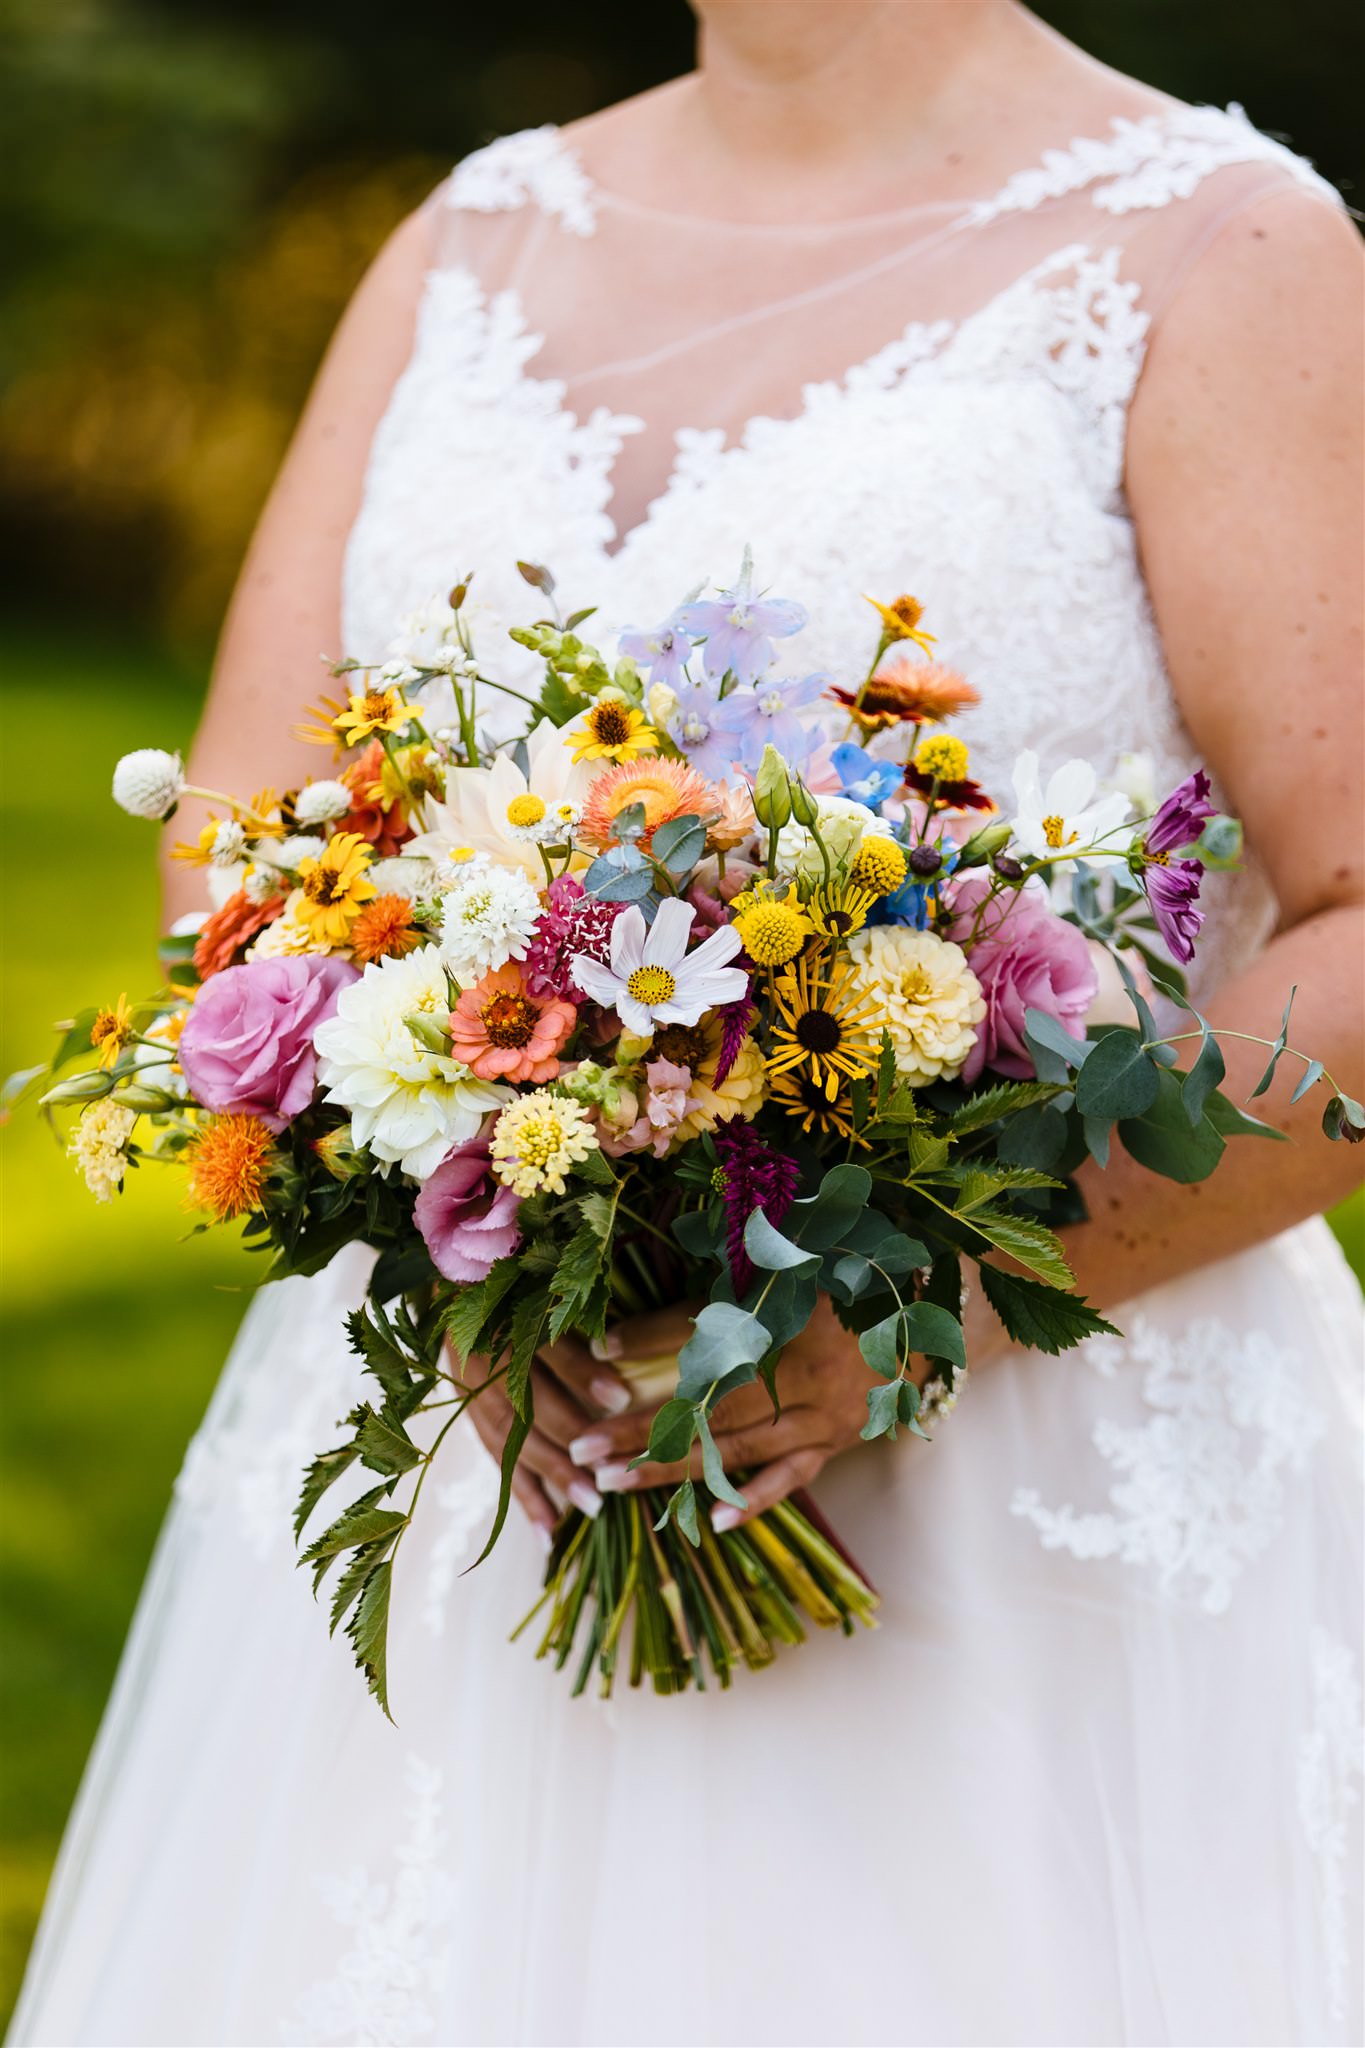 A close up of a gorgeous colorful bridal bouquet of flowers.